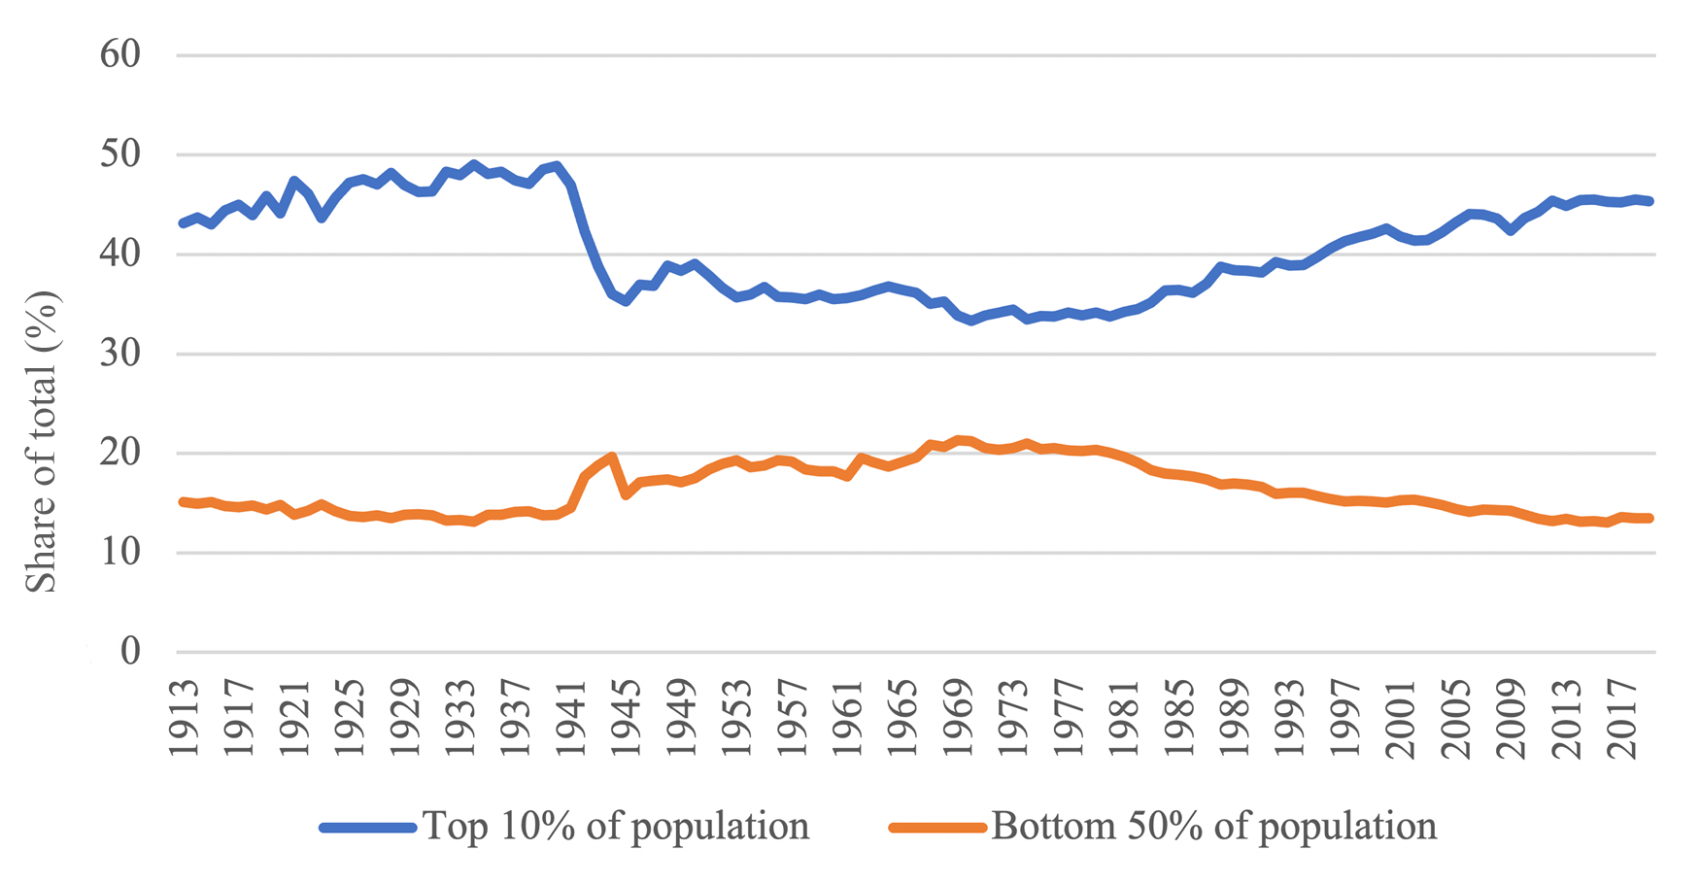 Line graph showing economic inequality in the United States from 1931 to 2019. Inequality between the top 10% and bottom 50% of the population is initially wide, narrows sharply in 1945, then again widens beginning in the 1980s, approaching its original levels by 2019, when 45% of U.S. national income belonged to the top 10% and only 14% of the national income to the bottom 50%. 